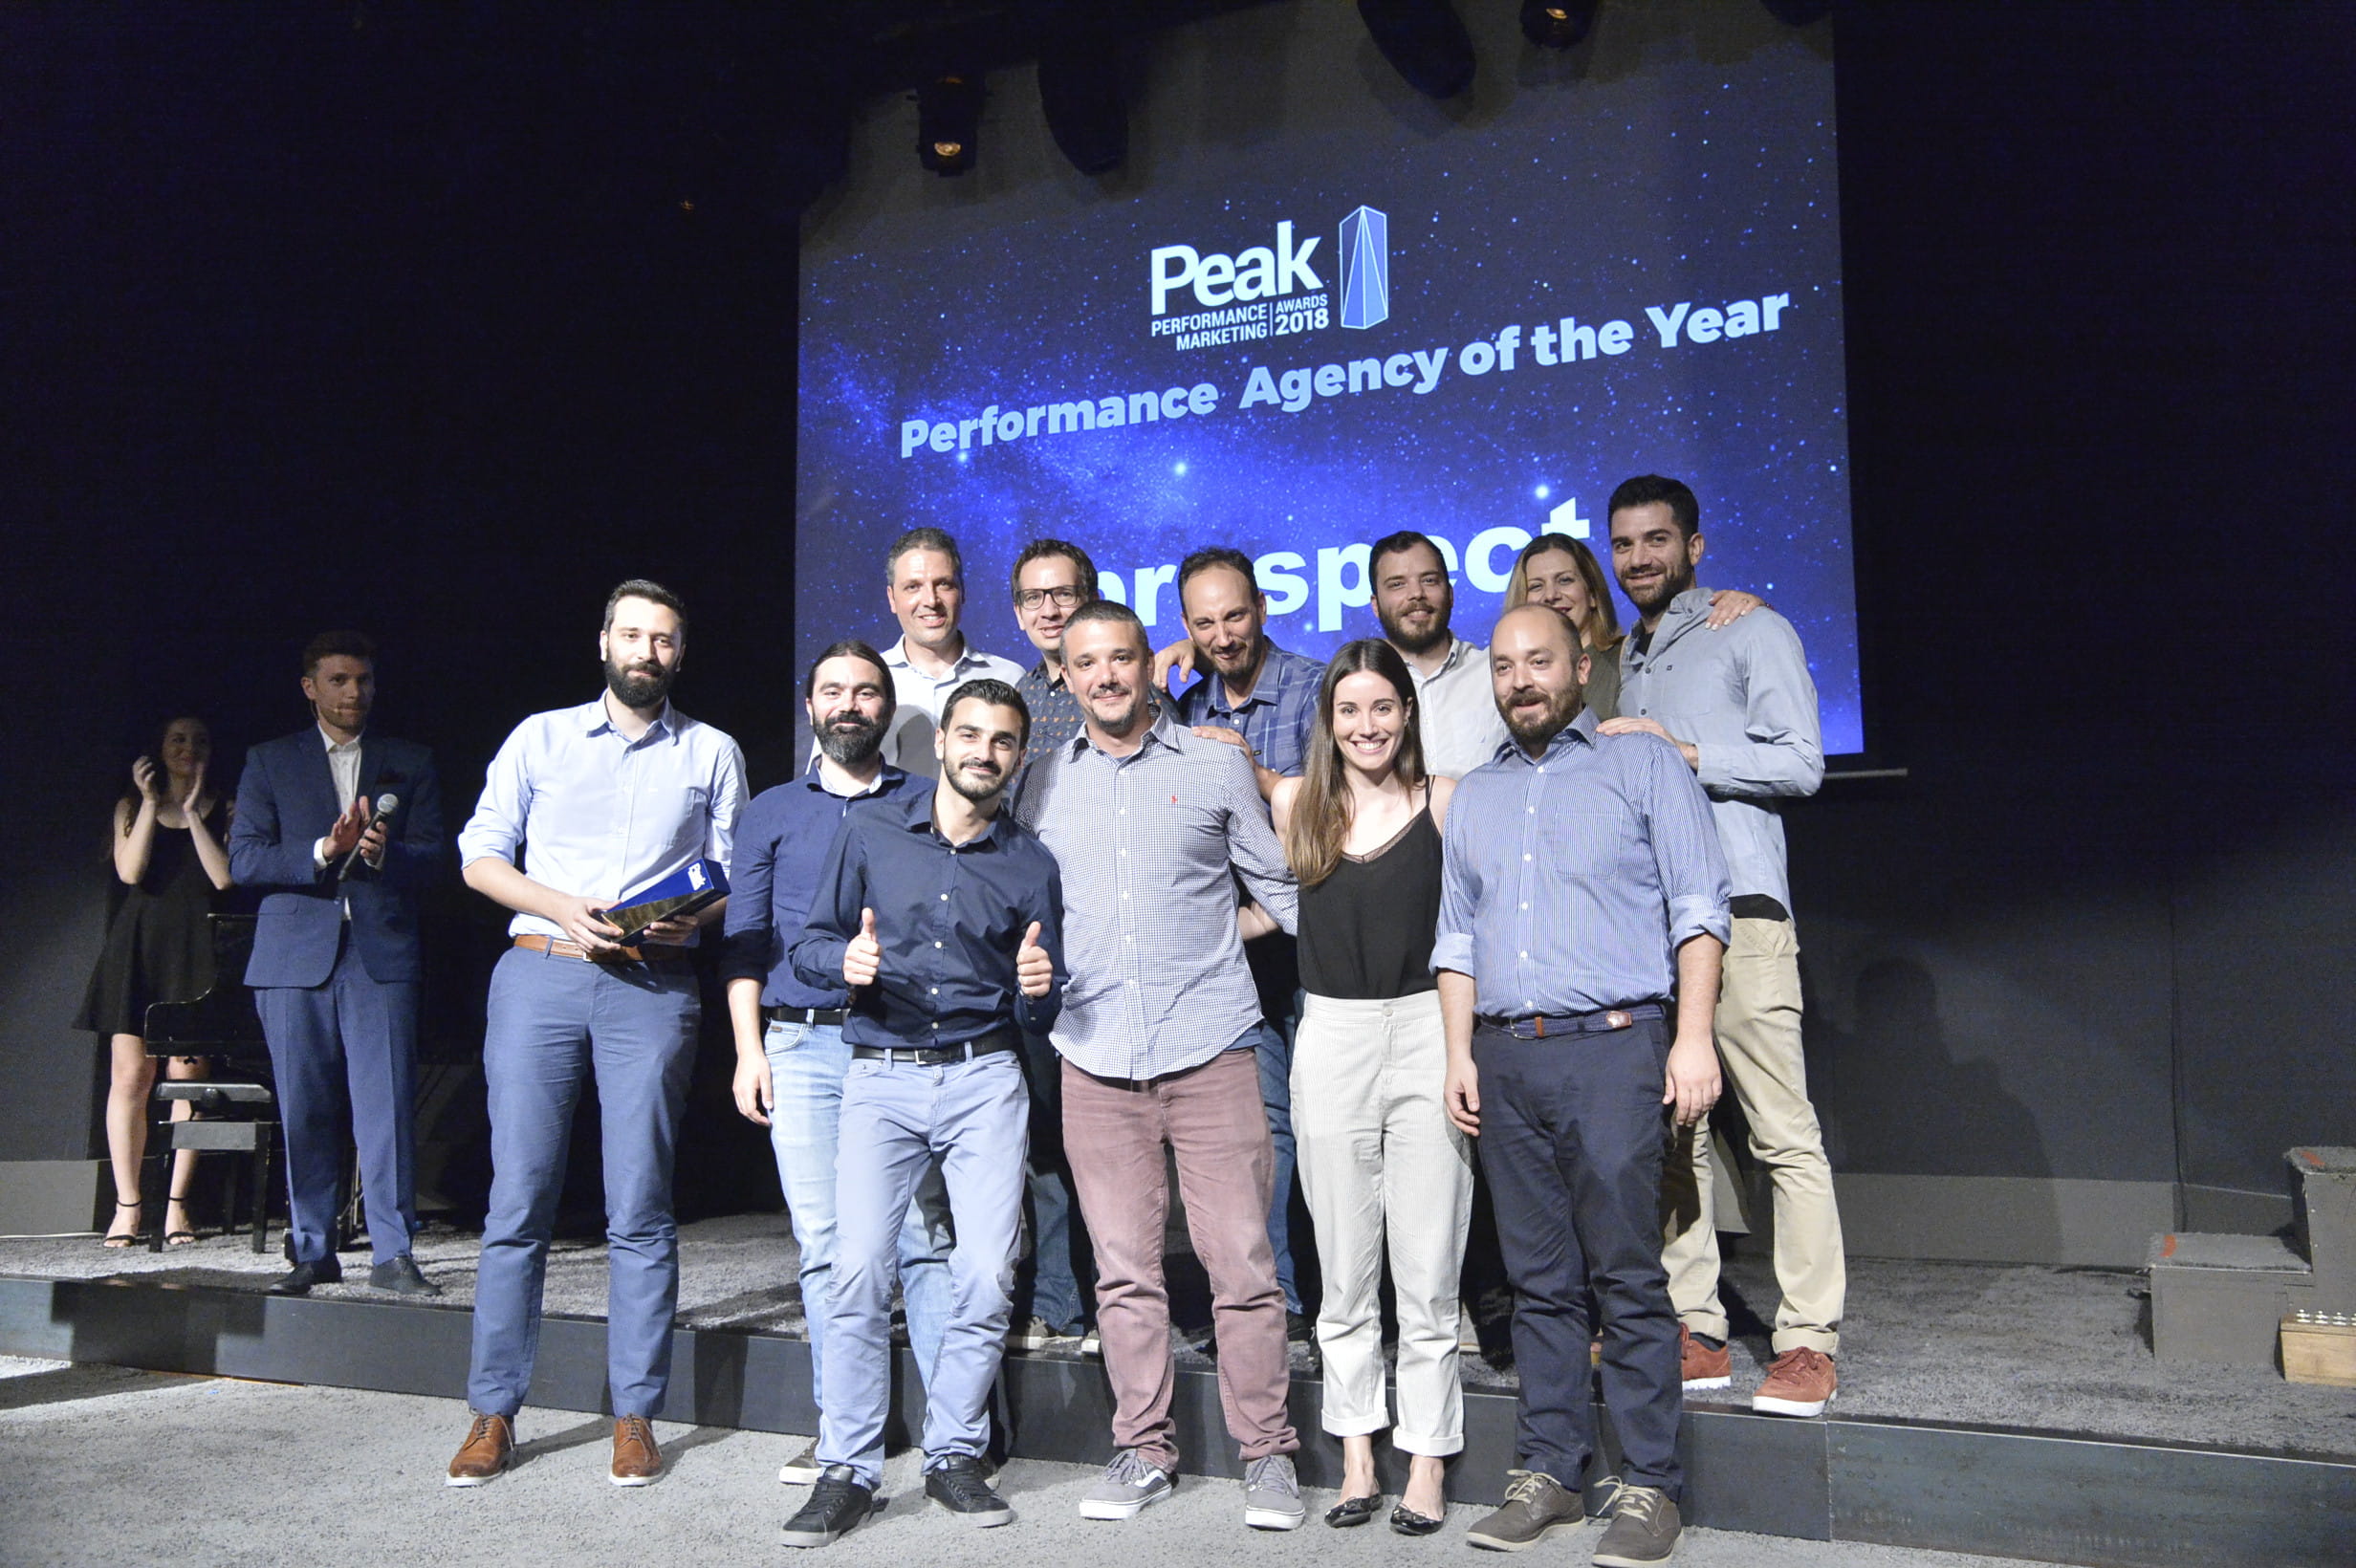 iProspect named "Performance Agency of the Year" 2018